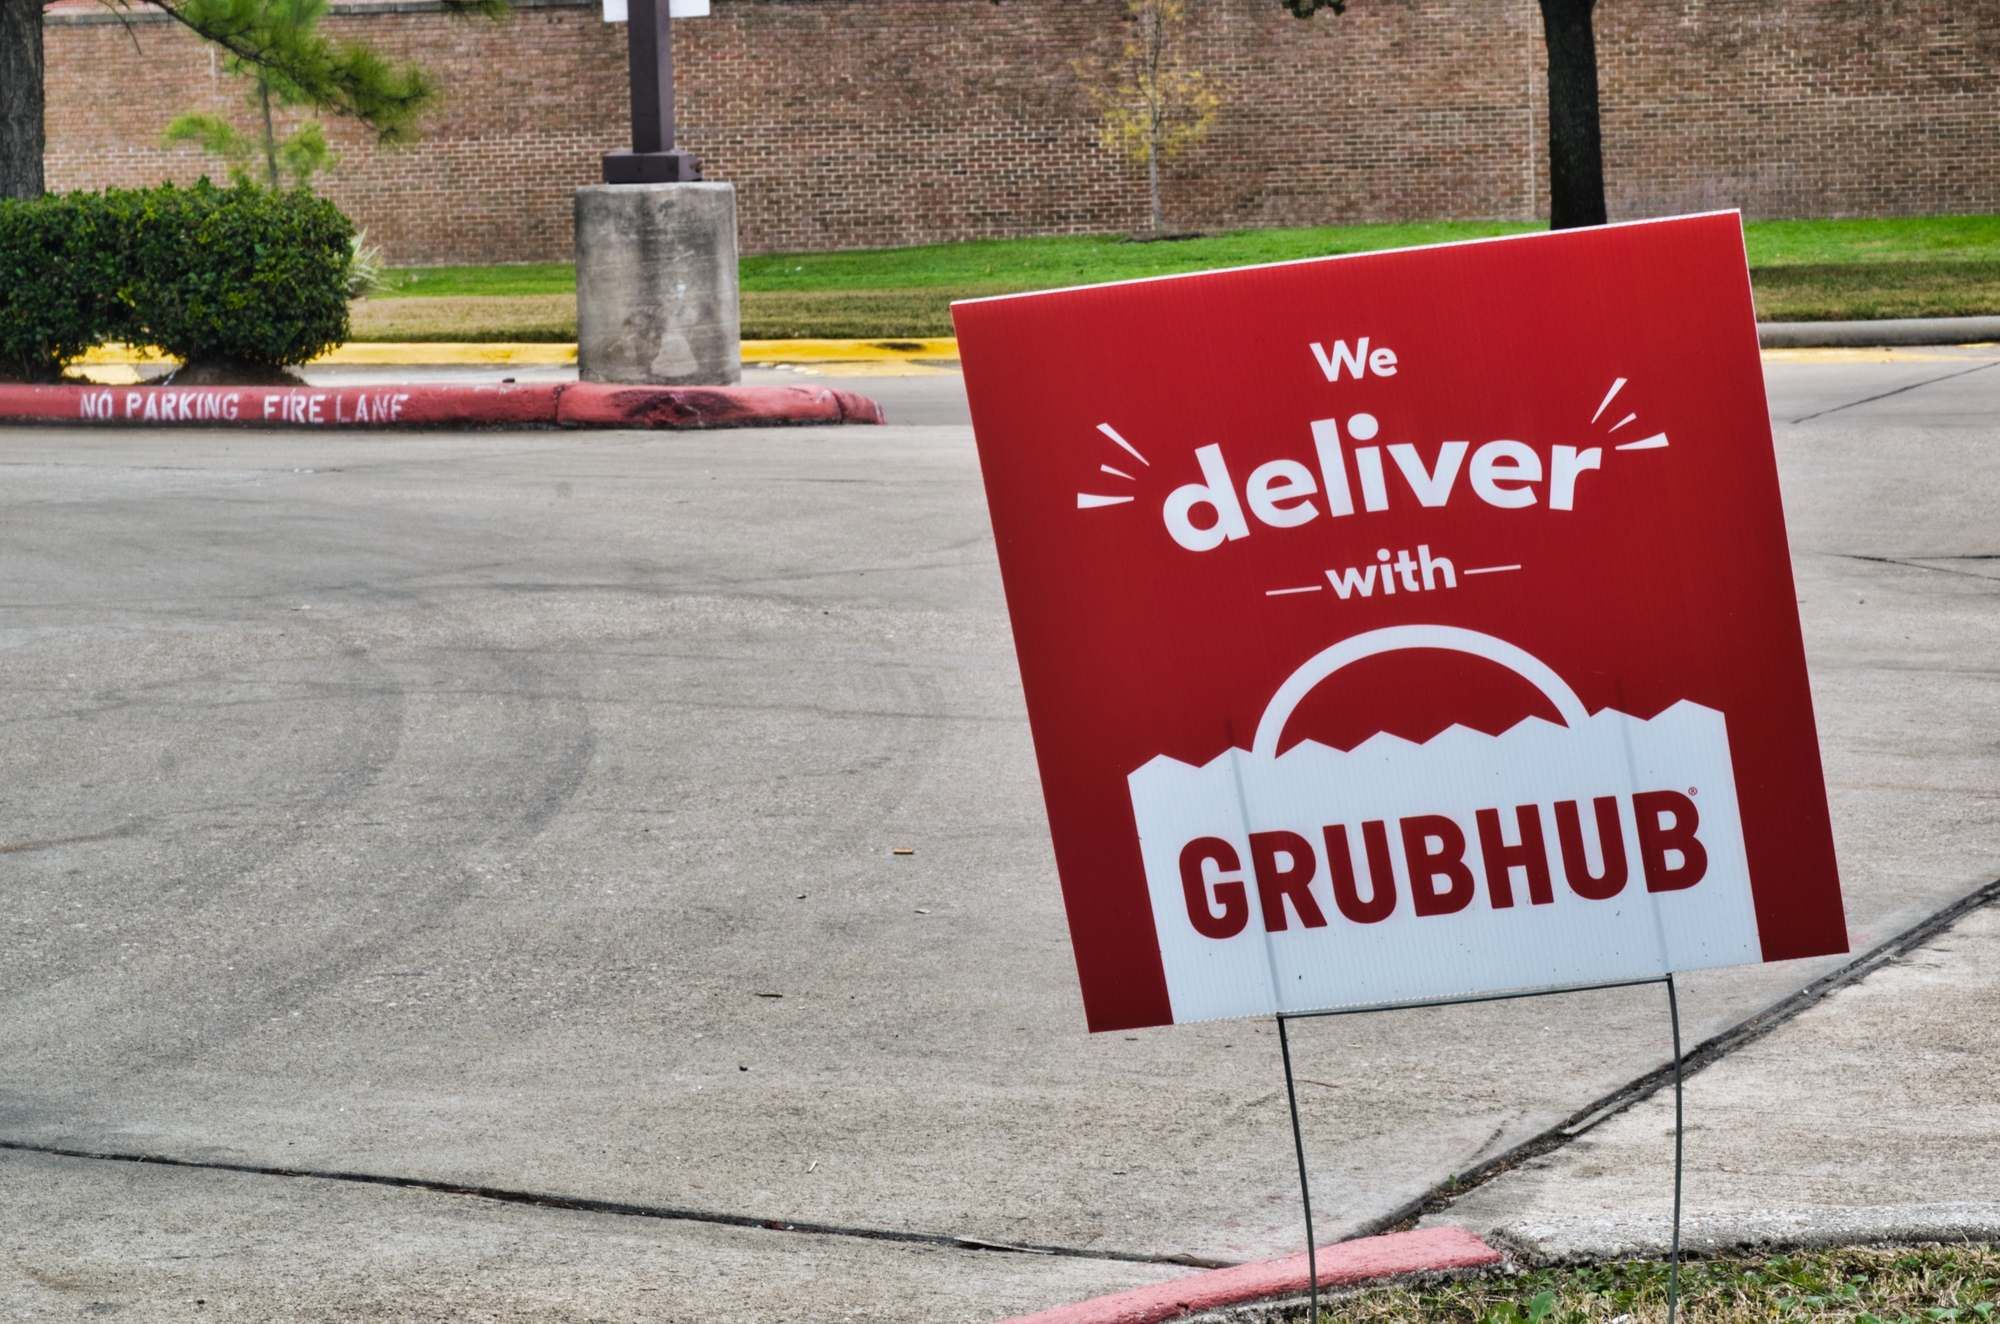 A class action lawsuit has been filed by restaurant owners against Grubhub 